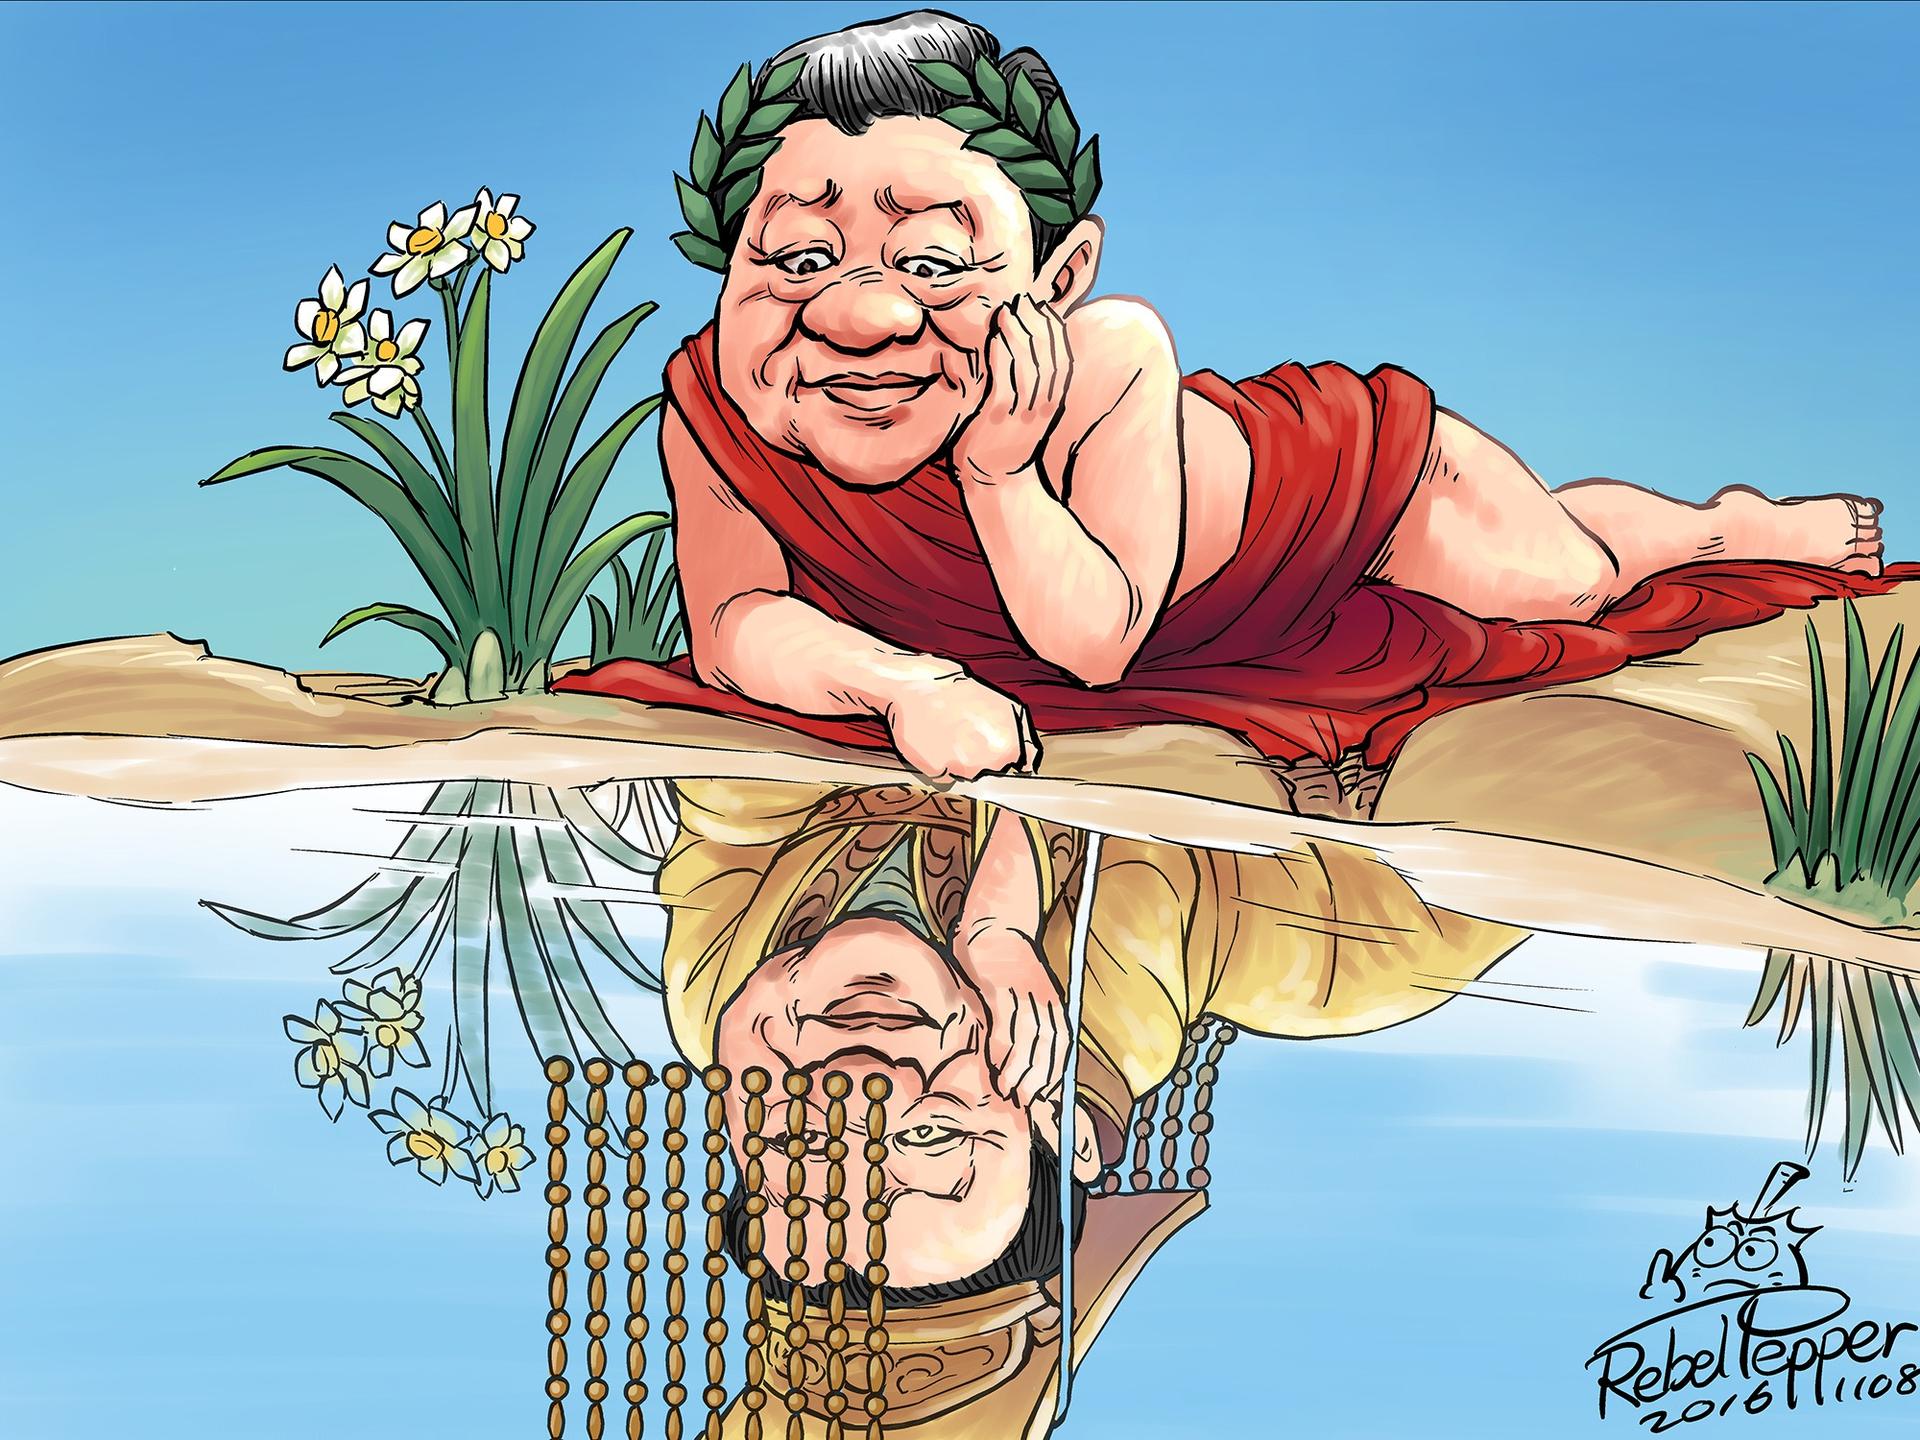 In this cartoon, Xi Jinping of China gazes at his reflection in a reference to the Greek legend of Narcissus.